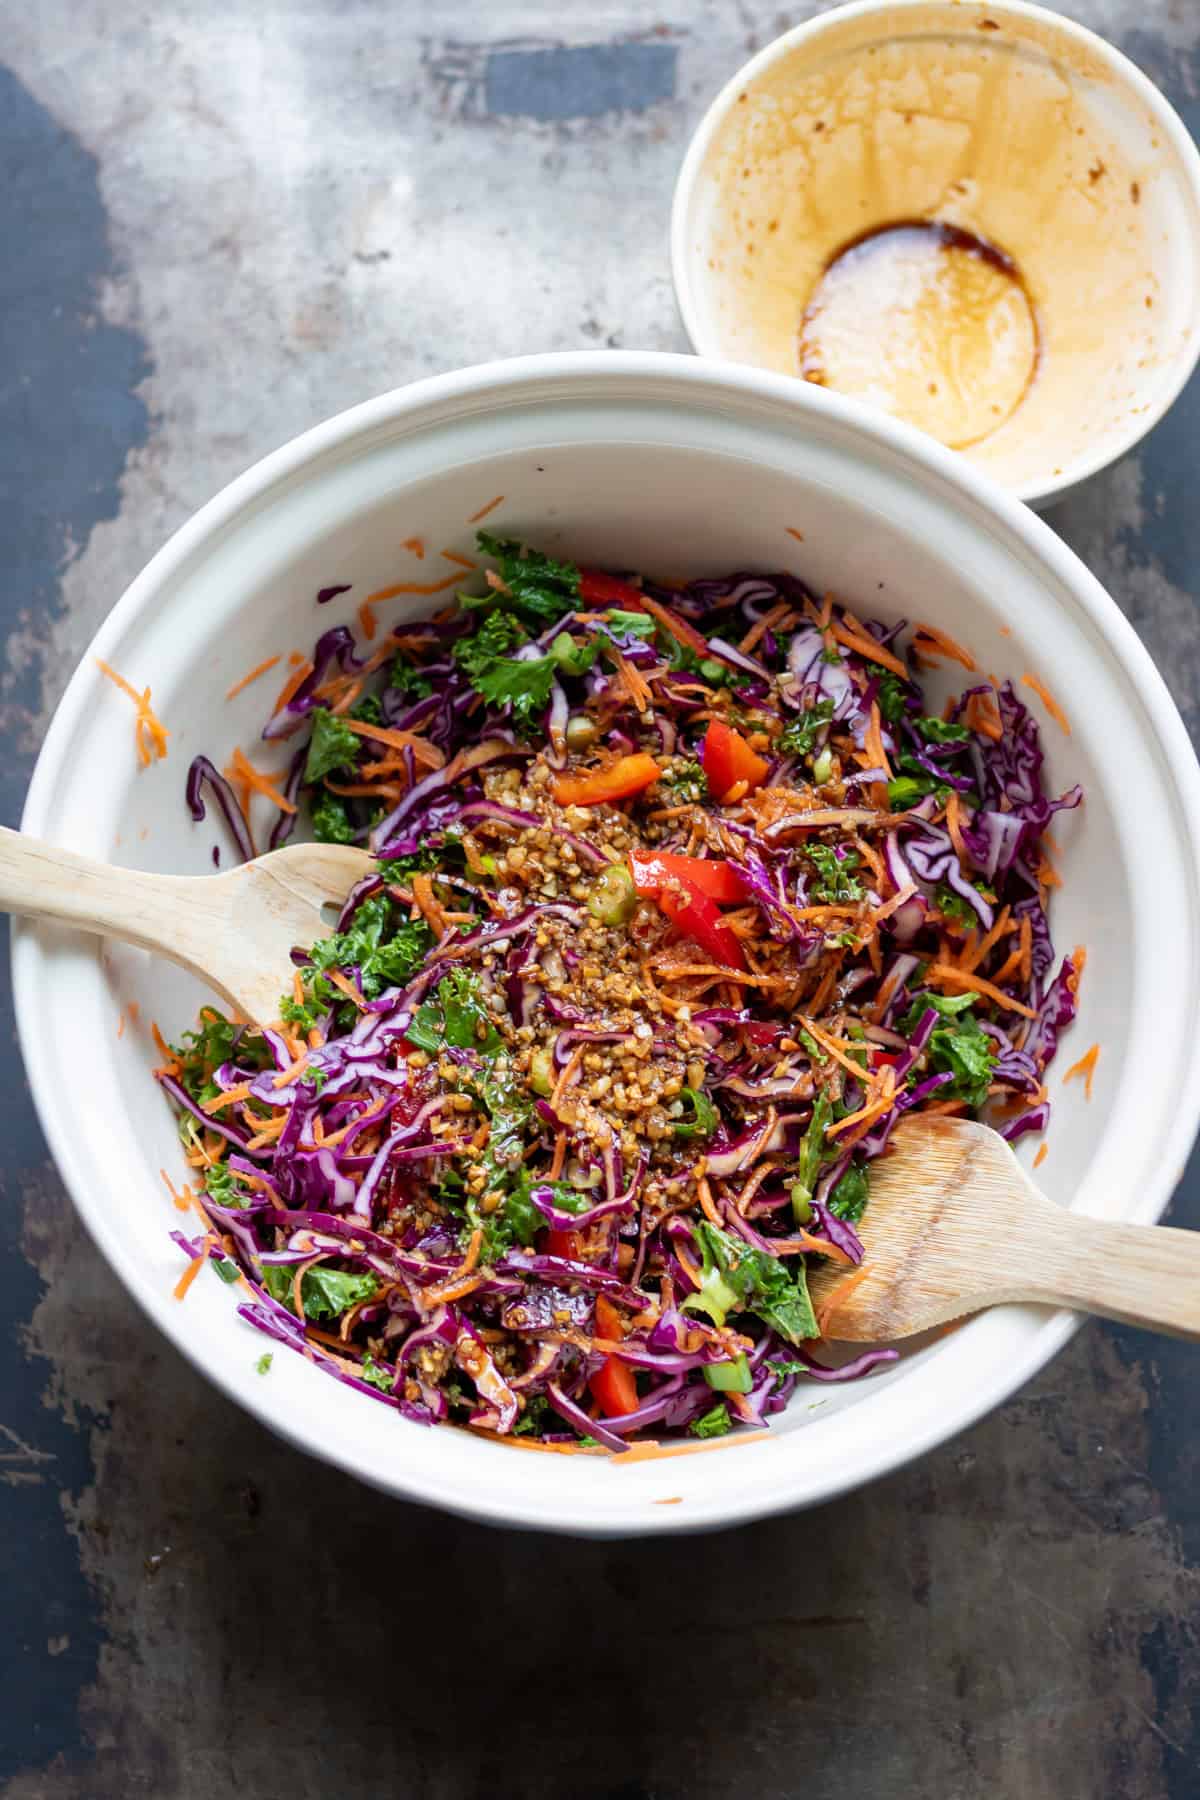 Mixing the asian dressing into the coleslaw vegetables.